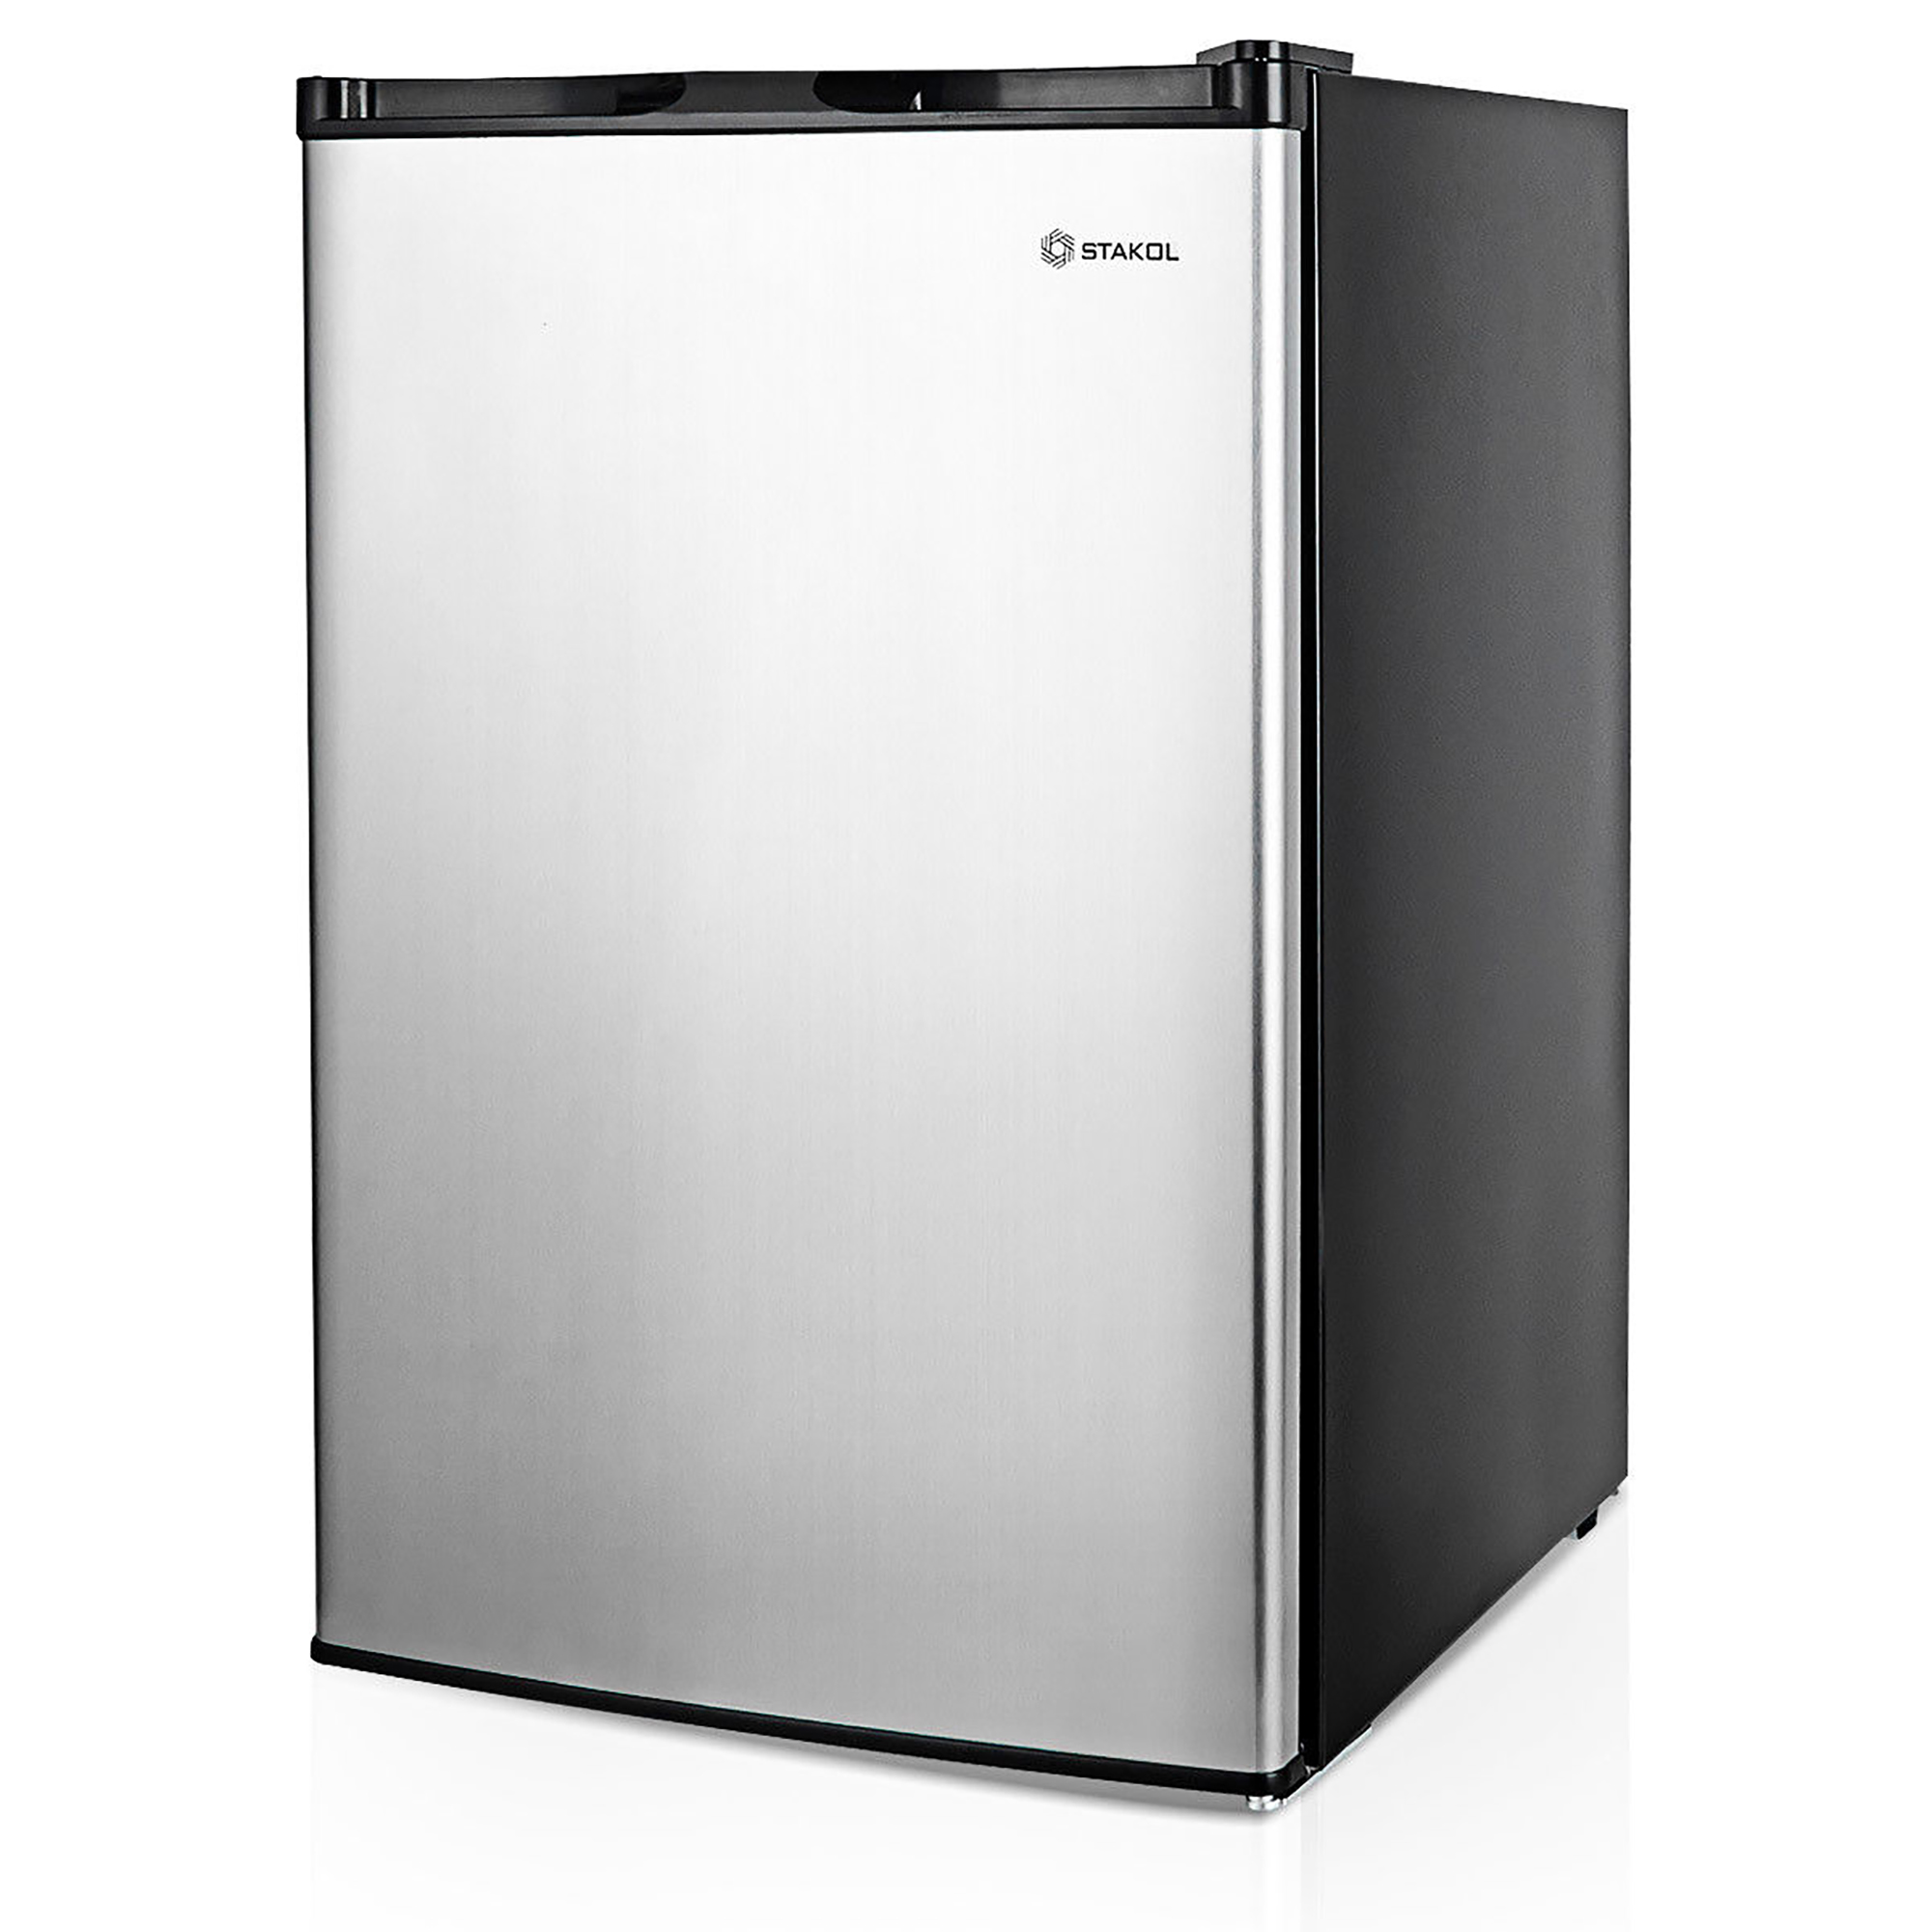 Costway STAKOL 3 cu.ft. Compact Upright Freezer w/Single Stainless Steel Door Removable Shelves